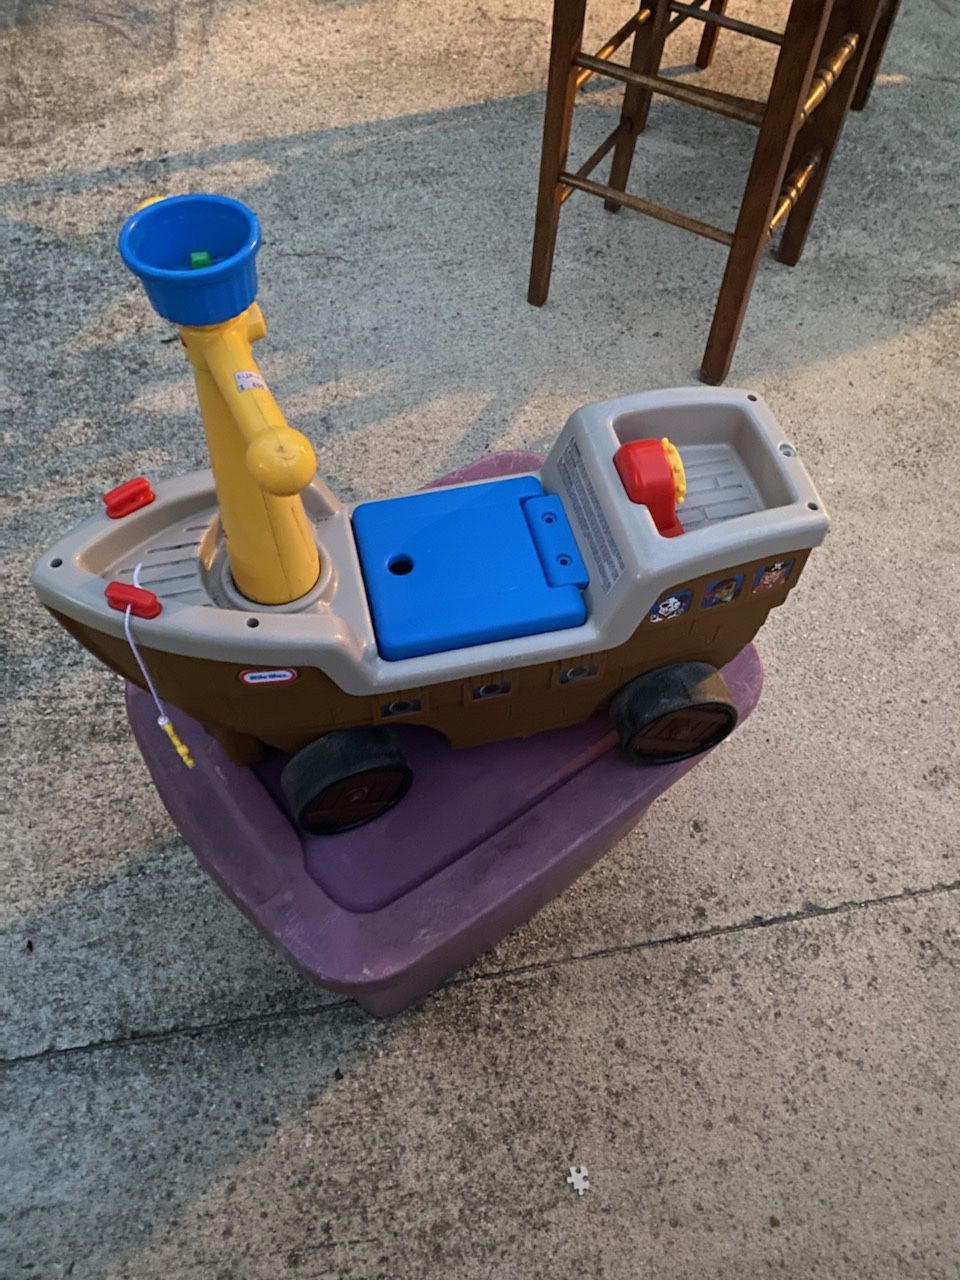 Little Tikes Play 'n Scoot Pirate Ship - Compare @ $35